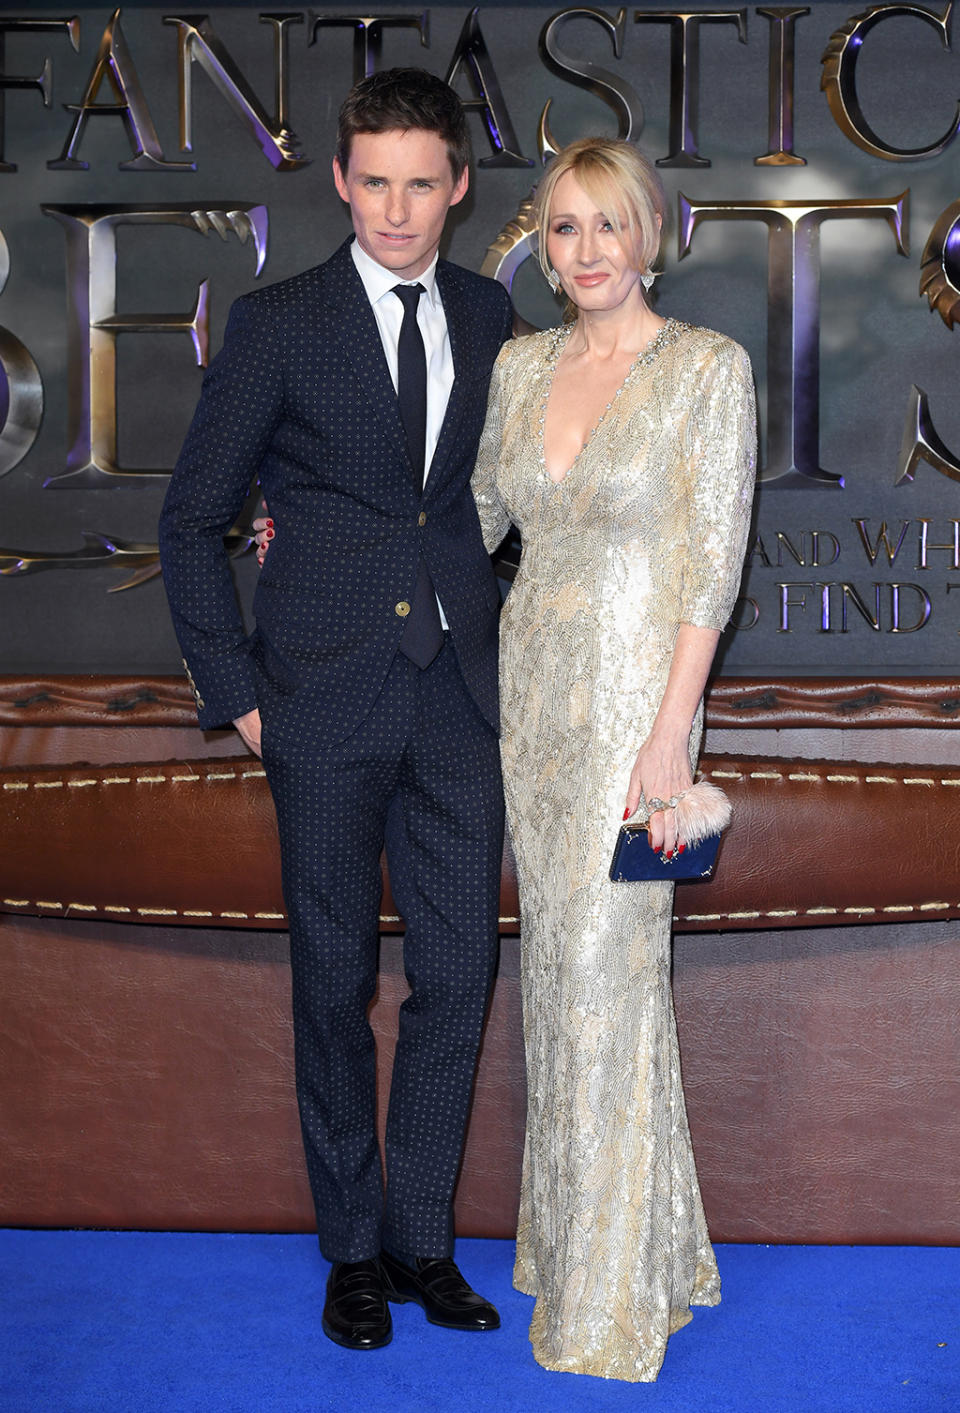 ‘Fantastic Beasts and Where to Find Them’ Premiere